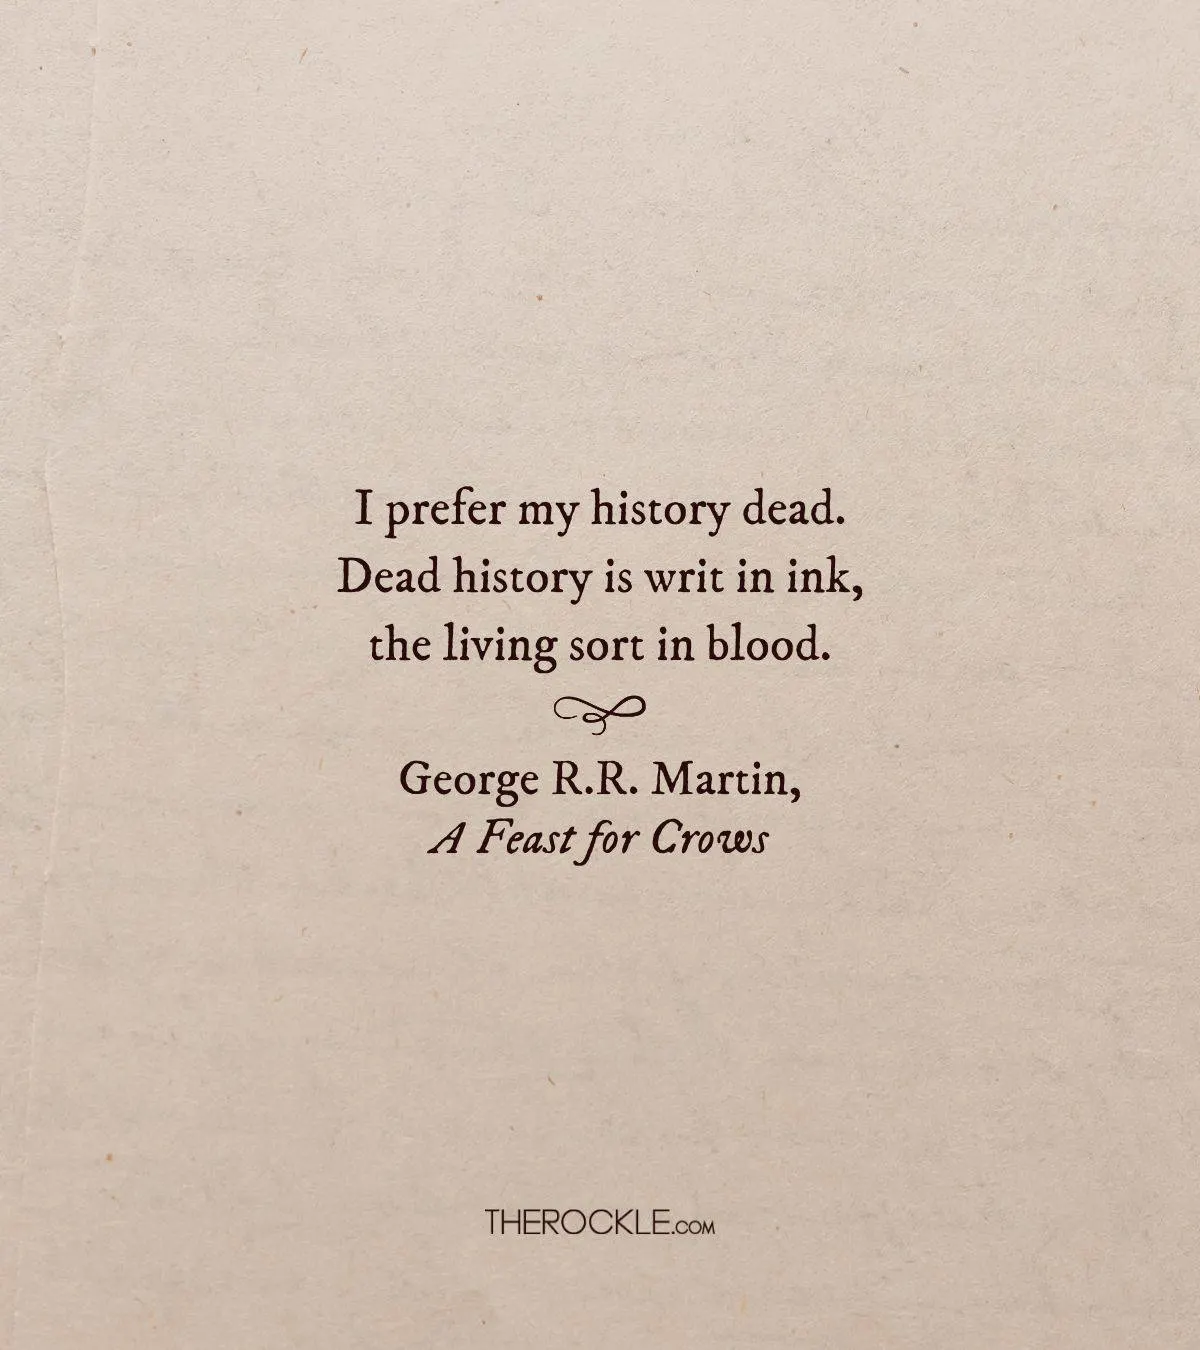 George R.R. Martin quote about history